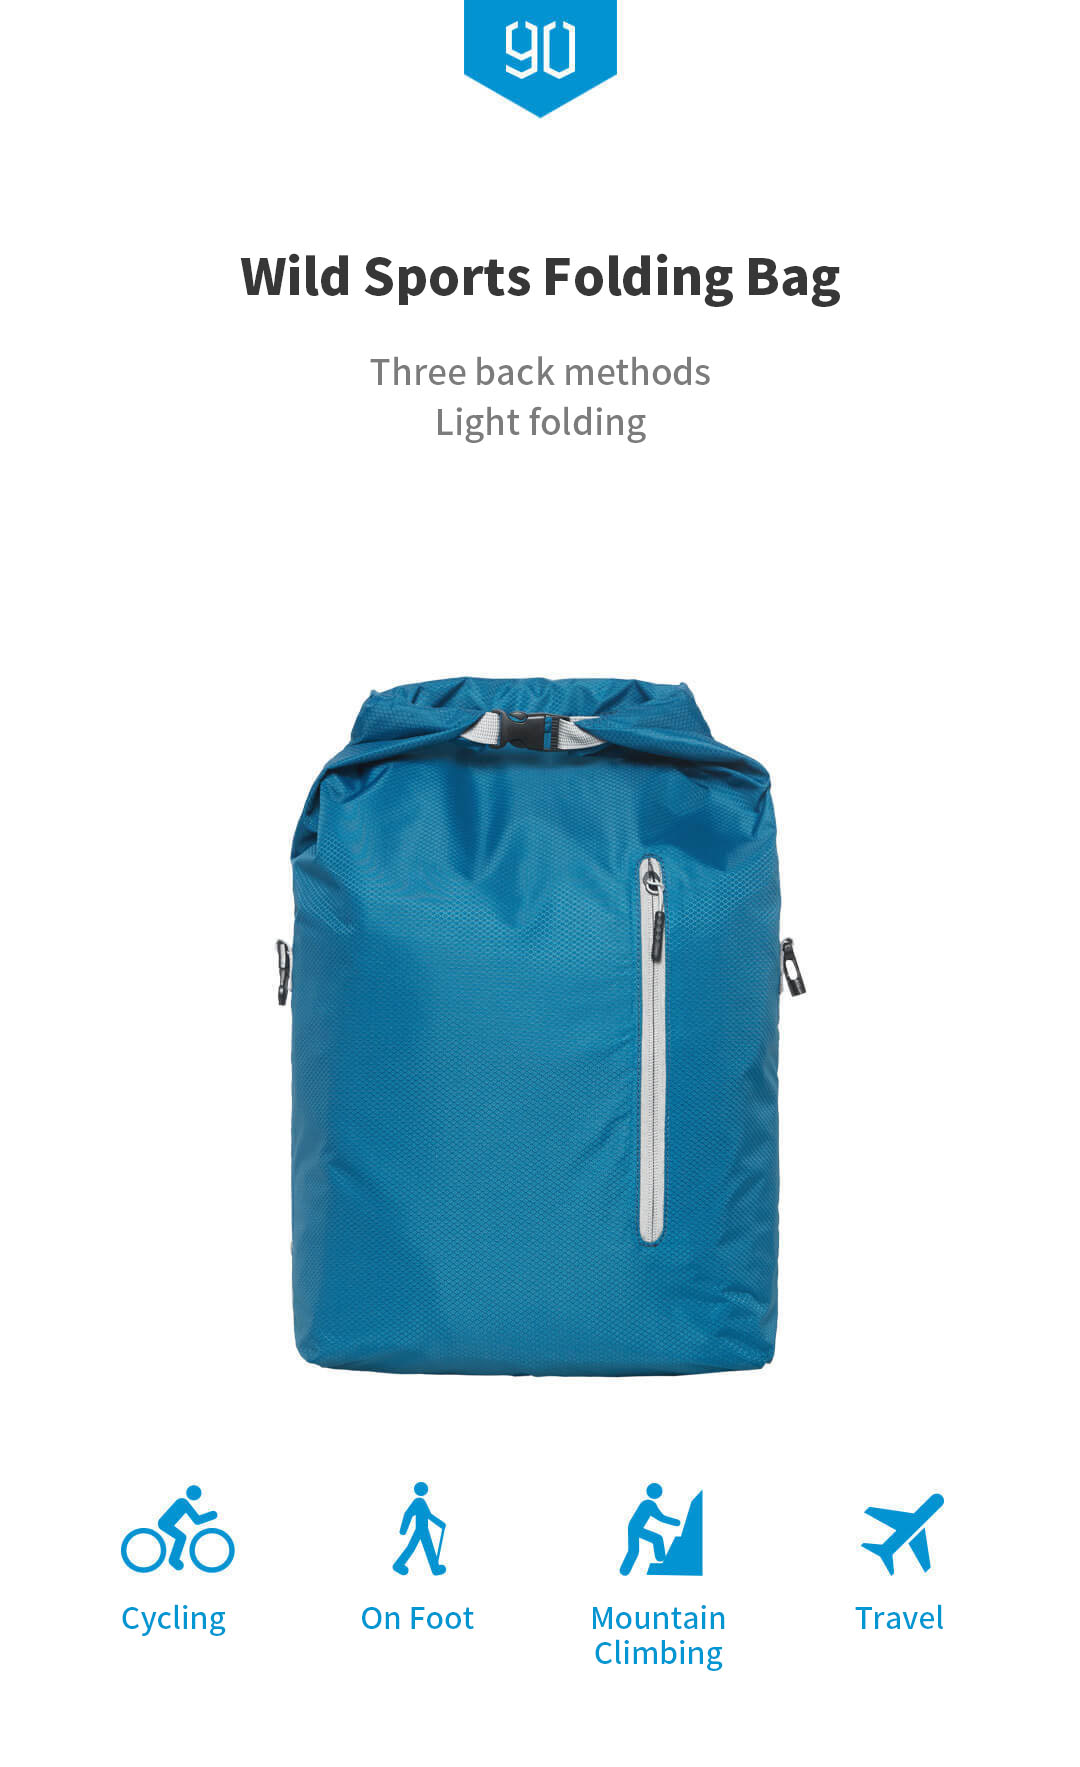 Outdoor-Backpack-Lightweight-Sports-Folding-Bag-Portable-Camping-Hiking-School-Bag-from-XIAOMI-YOUPI-1504212-1